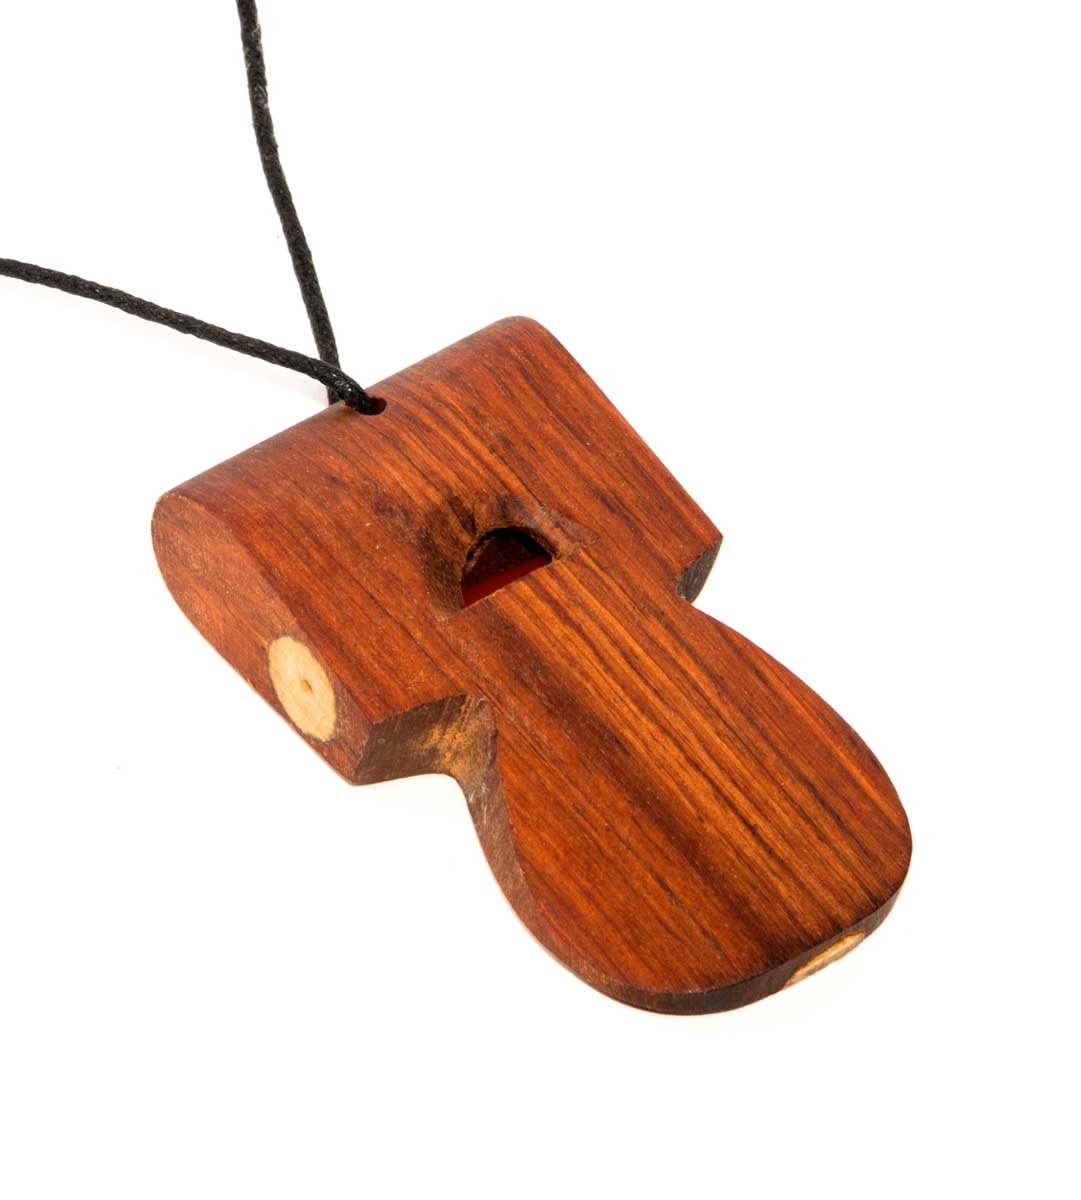 Apito 3 tone whistle wood hancarved on a string 8 x 4 cm